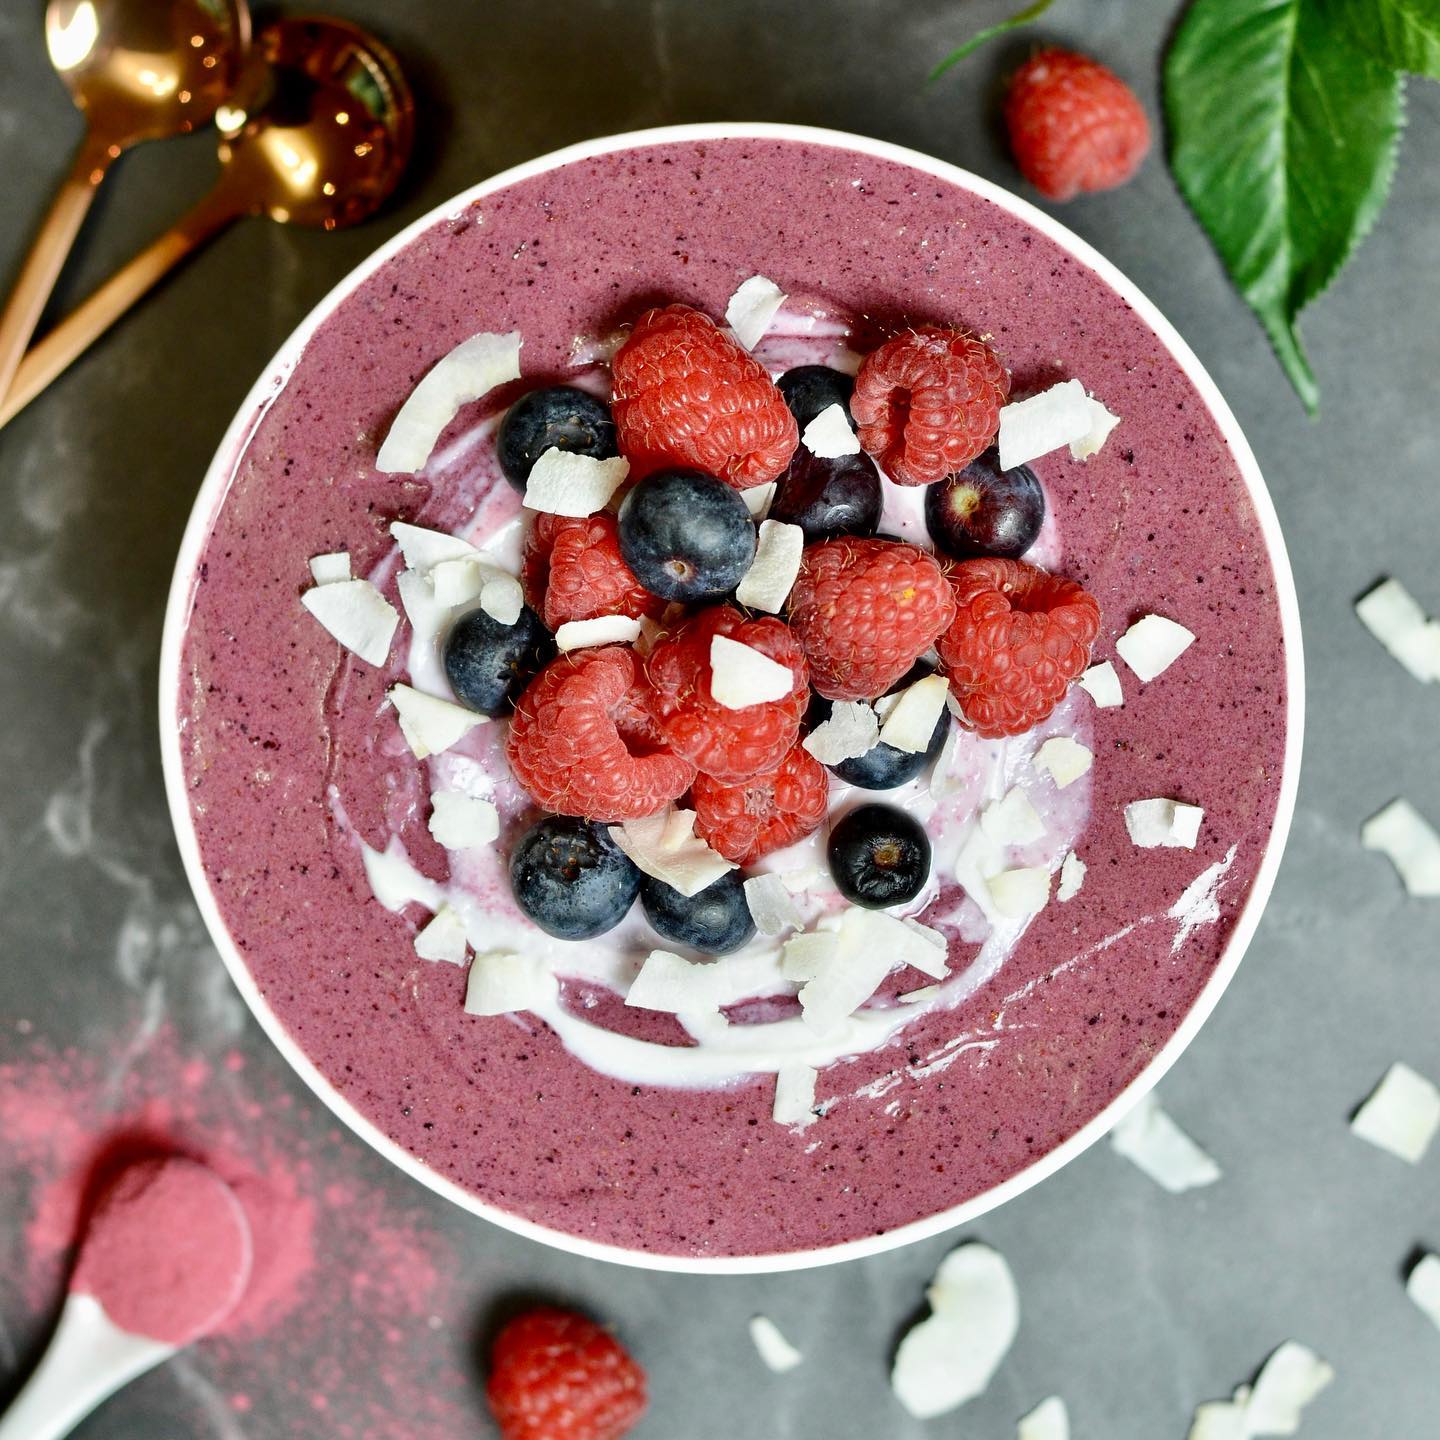 The perfect bowl to start the day off or recover post workout! It's got plenty of fruits, some hidden veg and superfoods that have incredible benefits for your skin and health